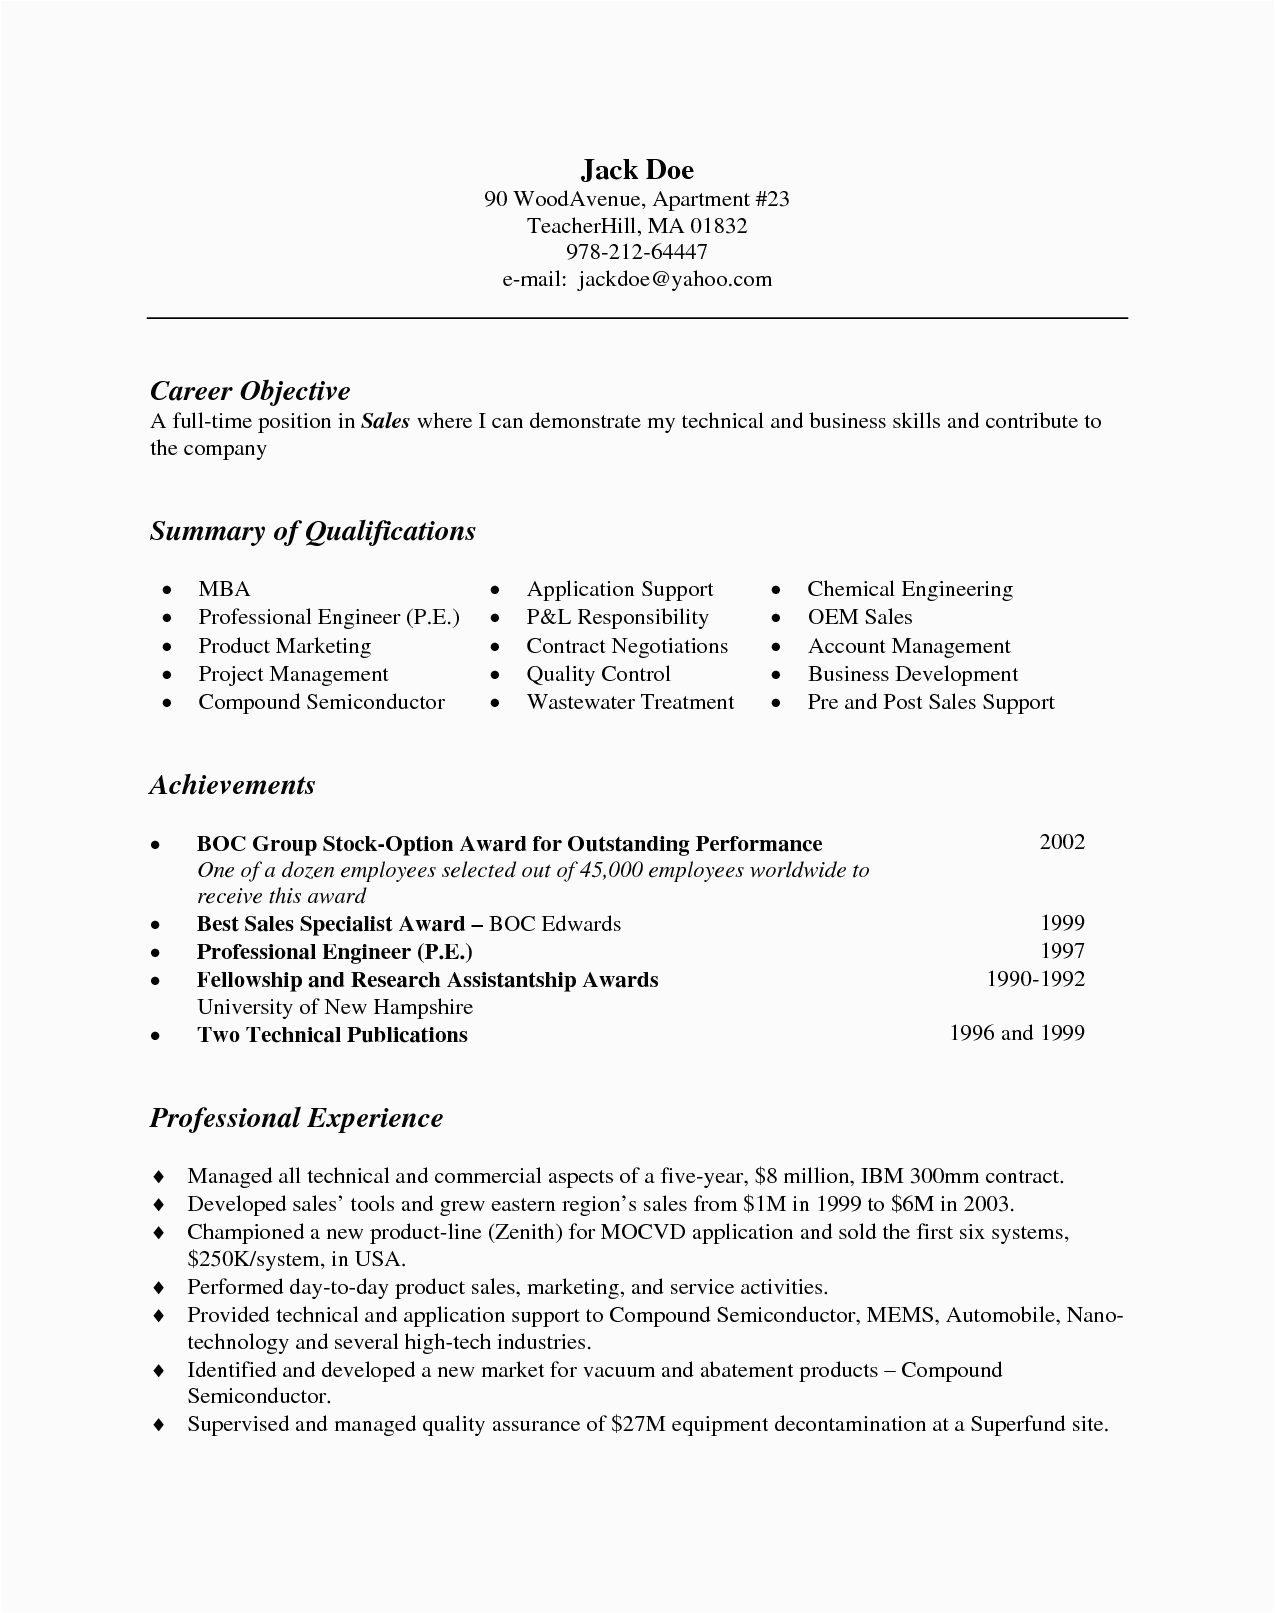 Query Language Bullet Point for Resume Sample Resume format Bullet Points Bullet format Points Resume